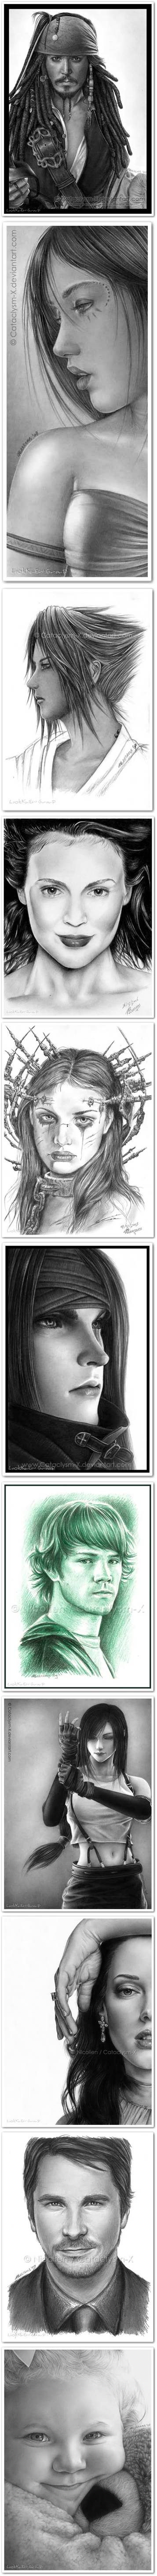 Amazing Drawings From Deviantart  ™ 